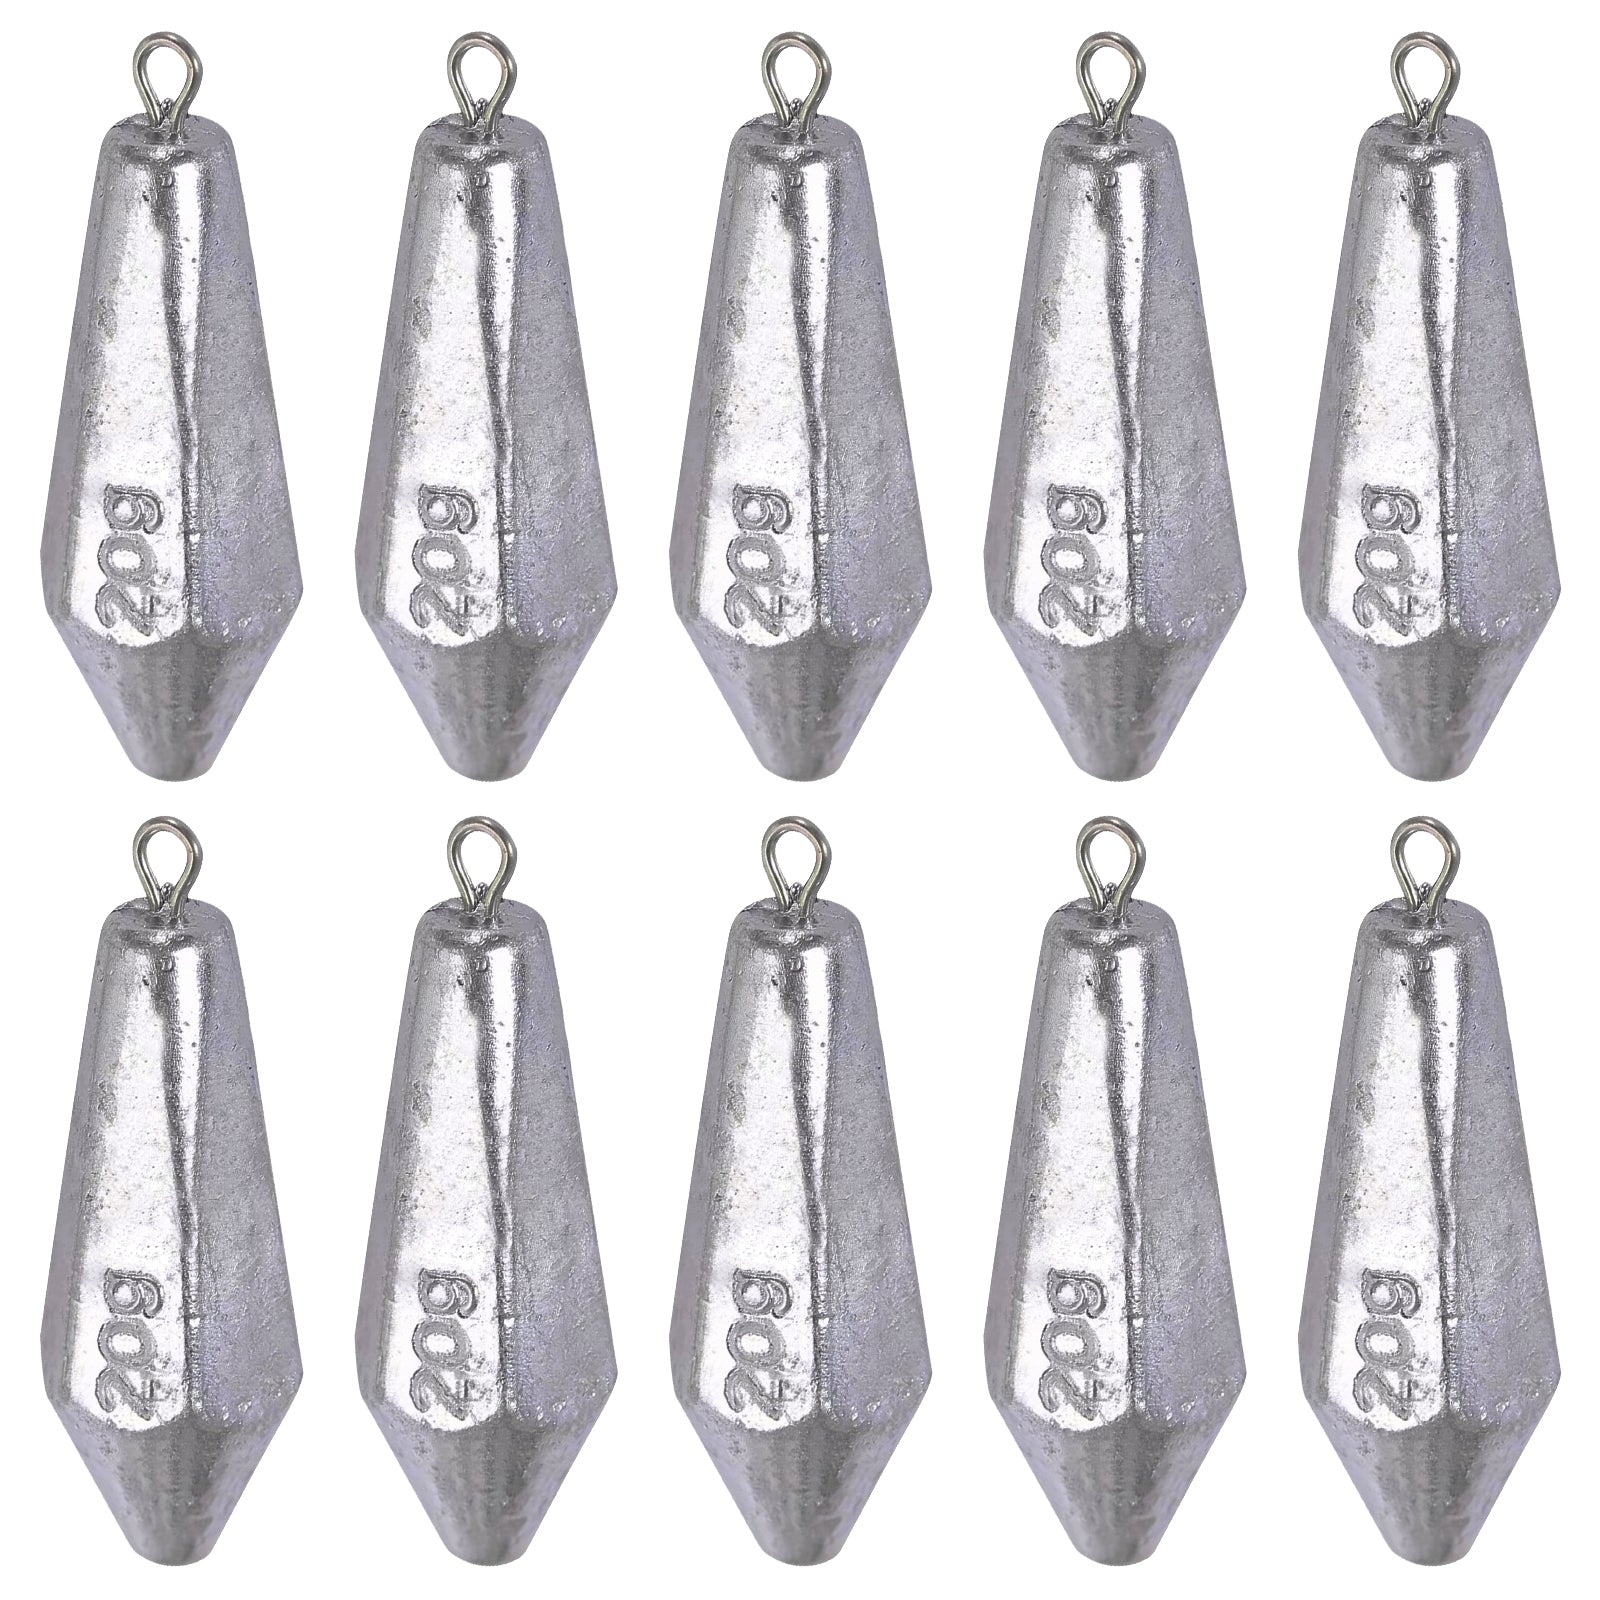 20 Pieces Fishing Sinkers Weights Fishing Weights Fishing Raindrop Bullet  Sinker Weight Lead Sinkers Water Drop Shape Weights for Bottom Fishing